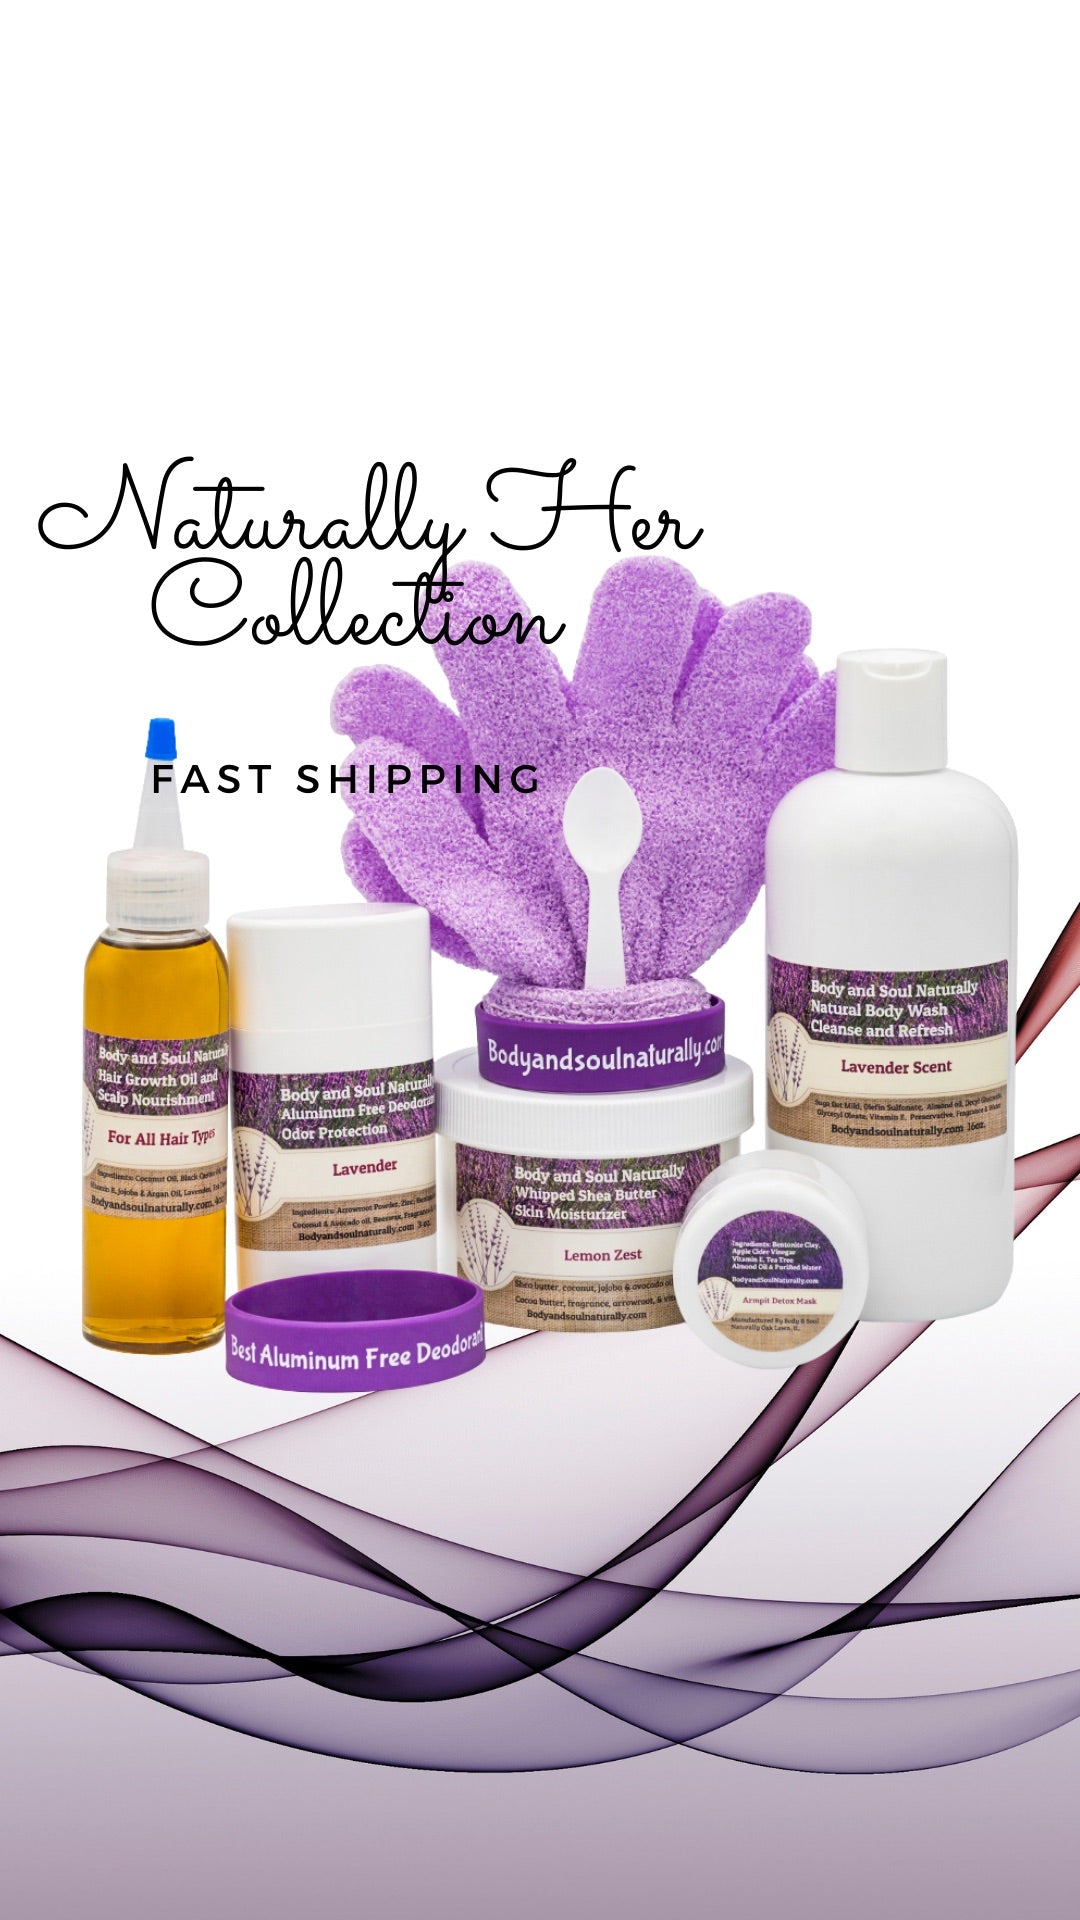 NATURALLY HER COLLECTION - Body and Soul Naturally